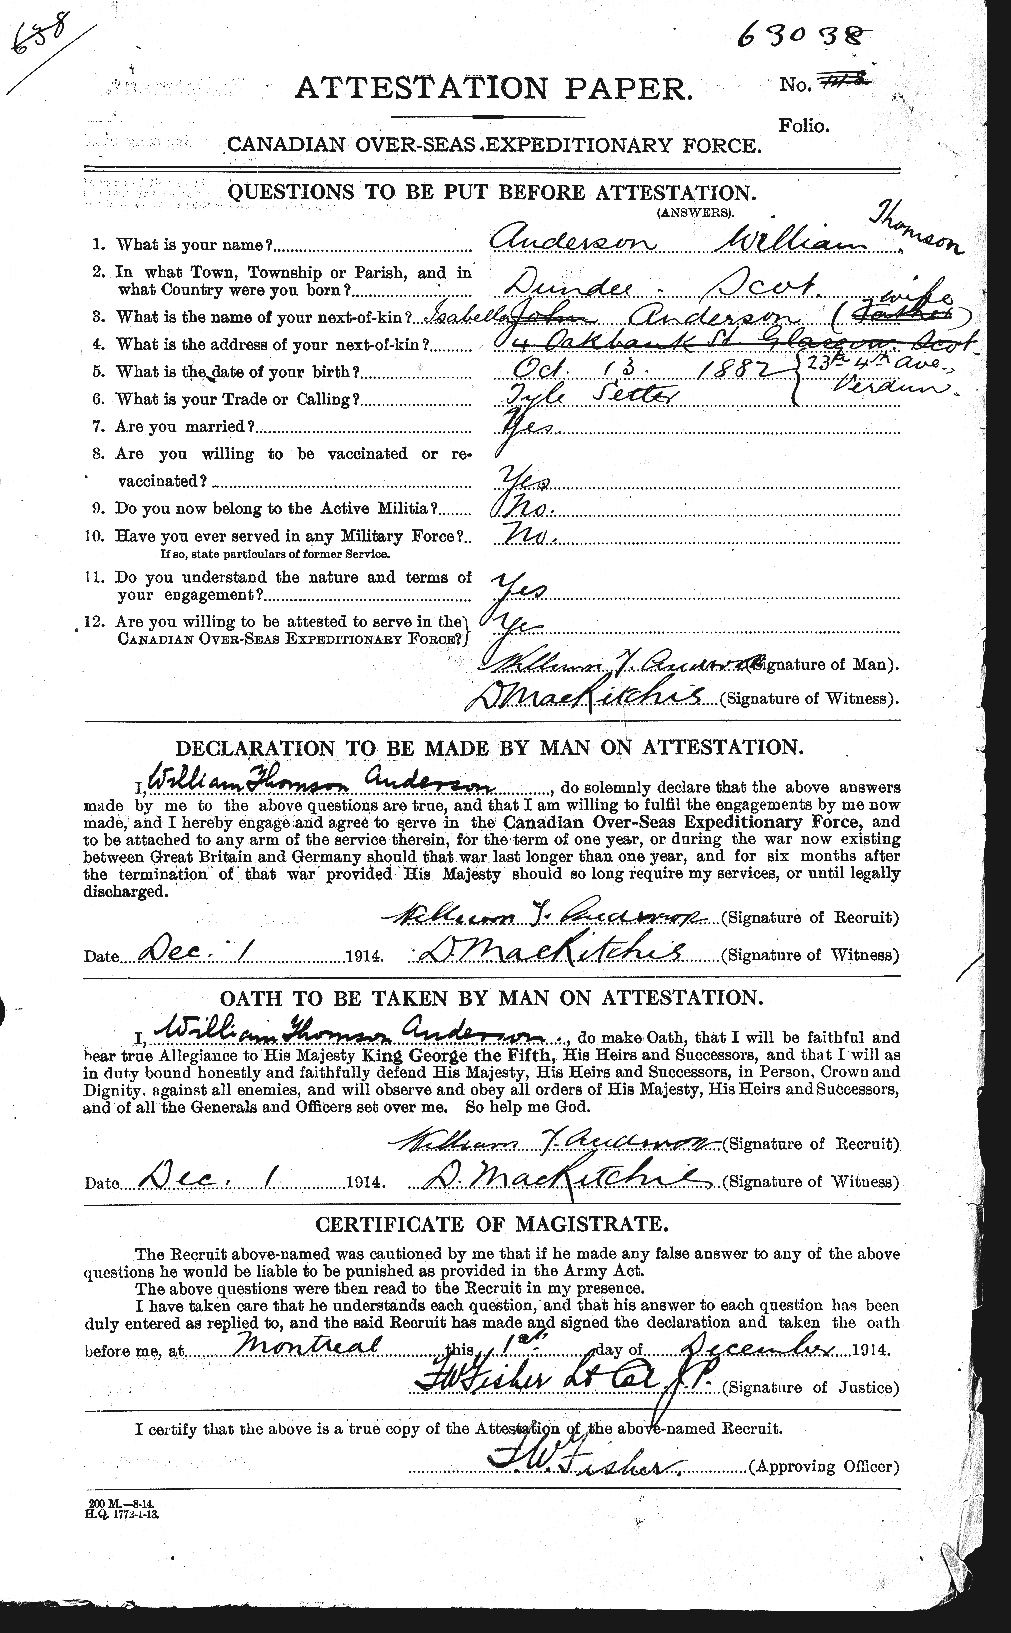 Personnel Records of the First World War - CEF 210668a